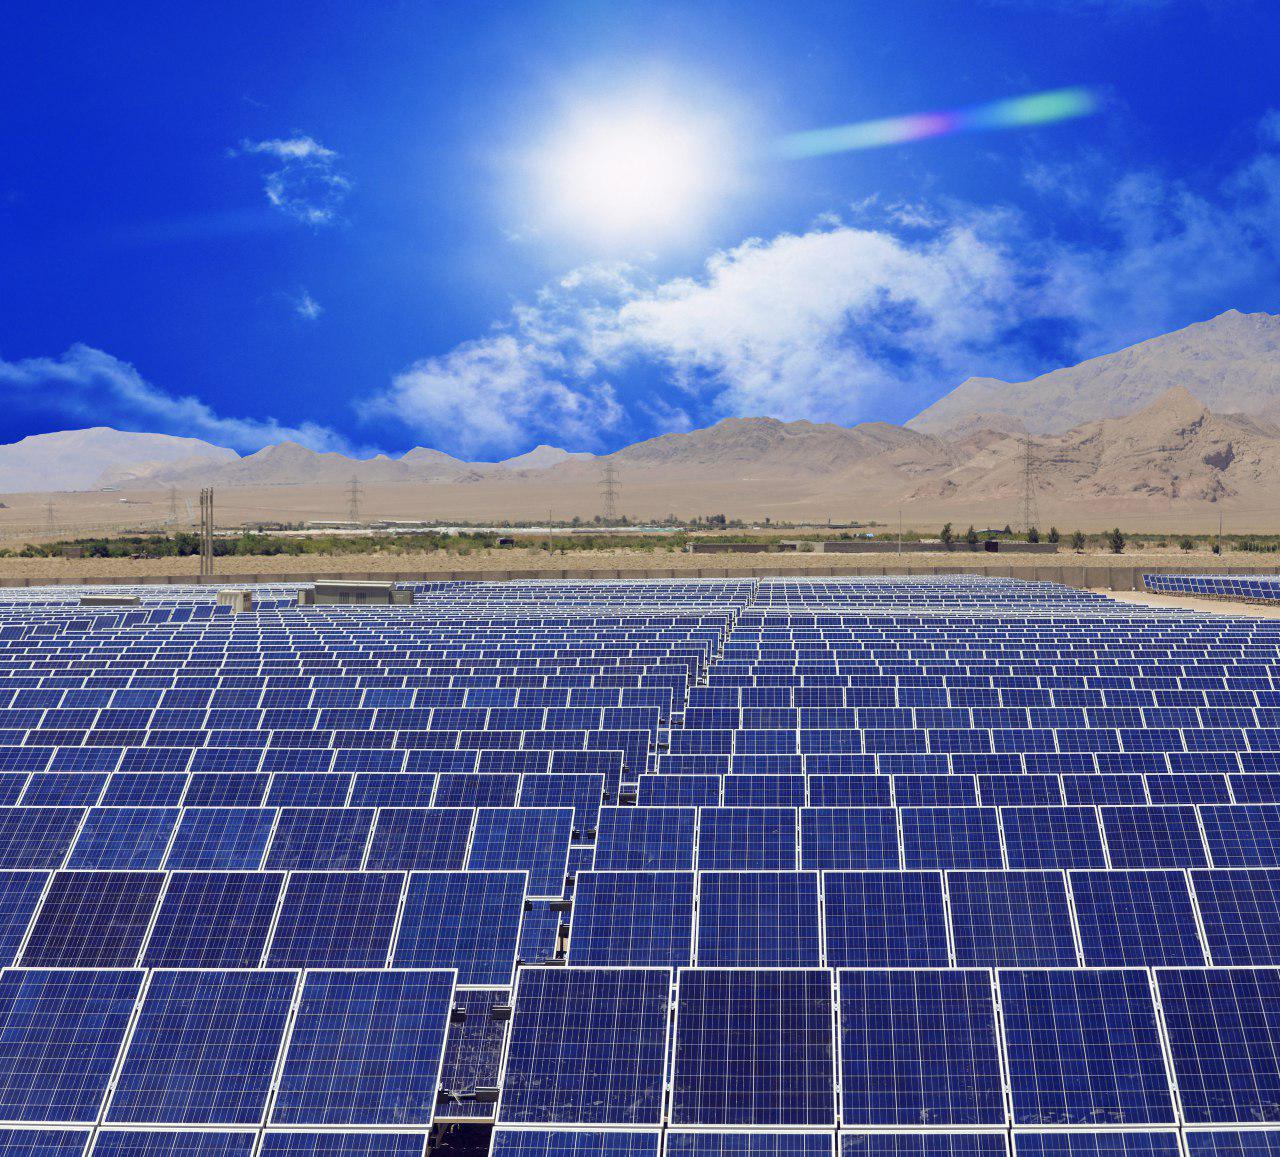 93MW solar power plant to be built in Mali